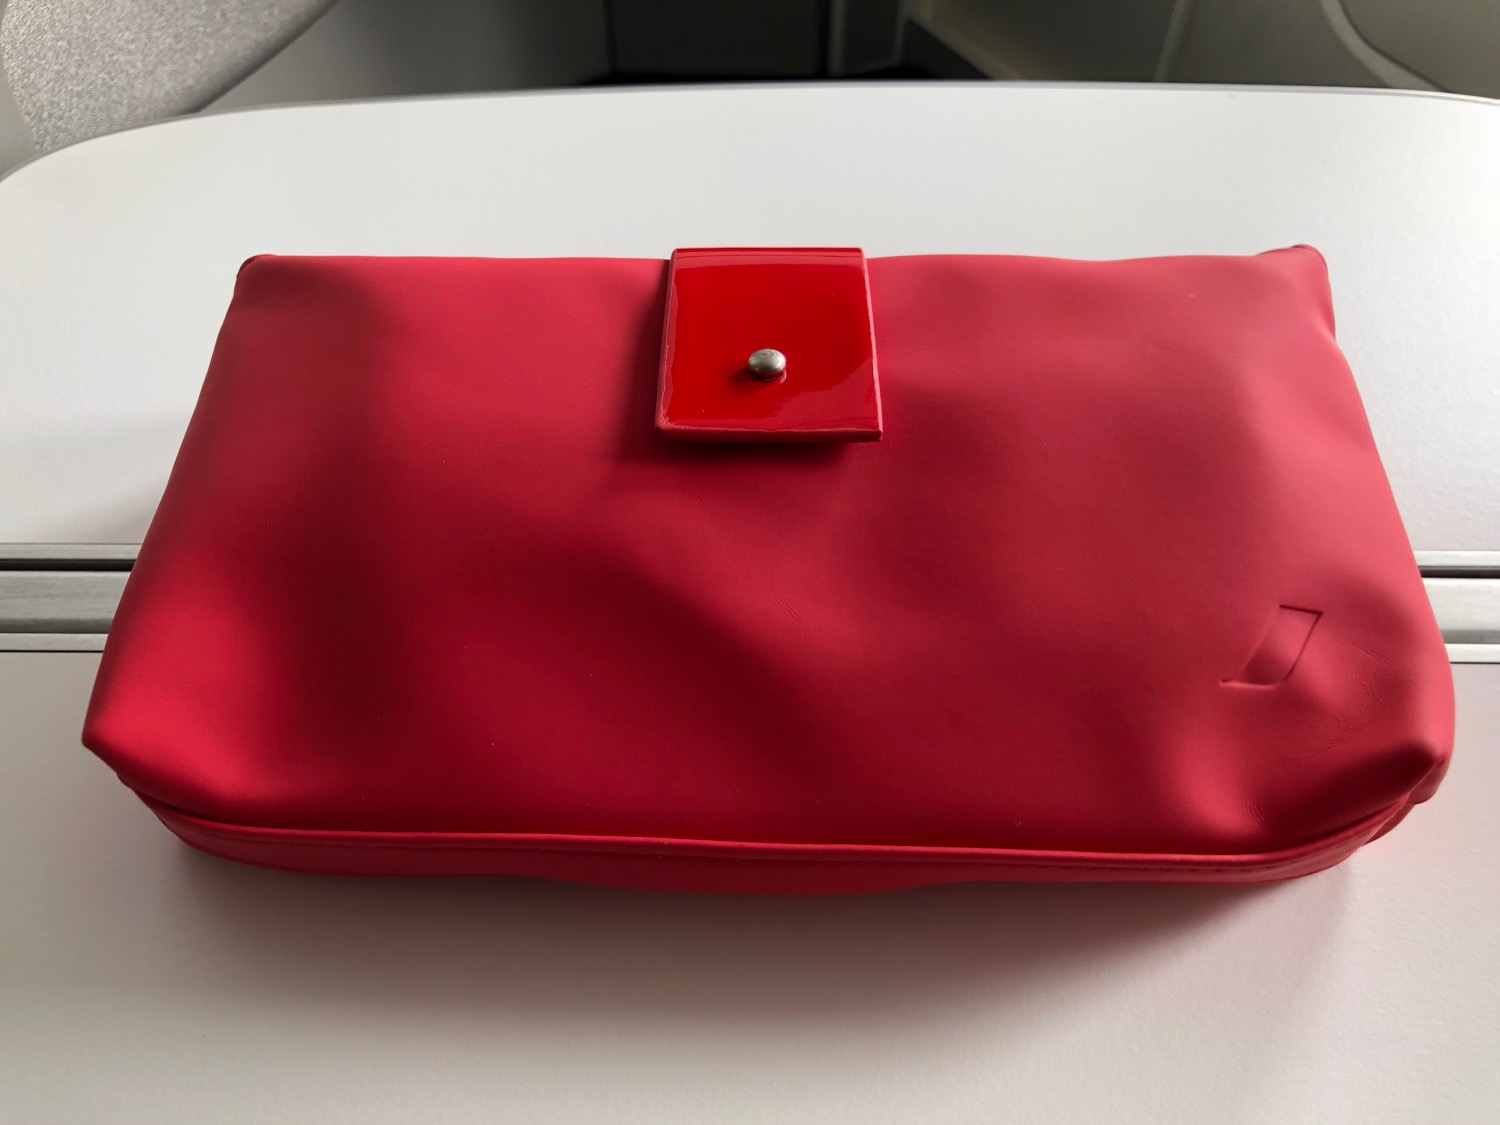 a red bag on a white surface